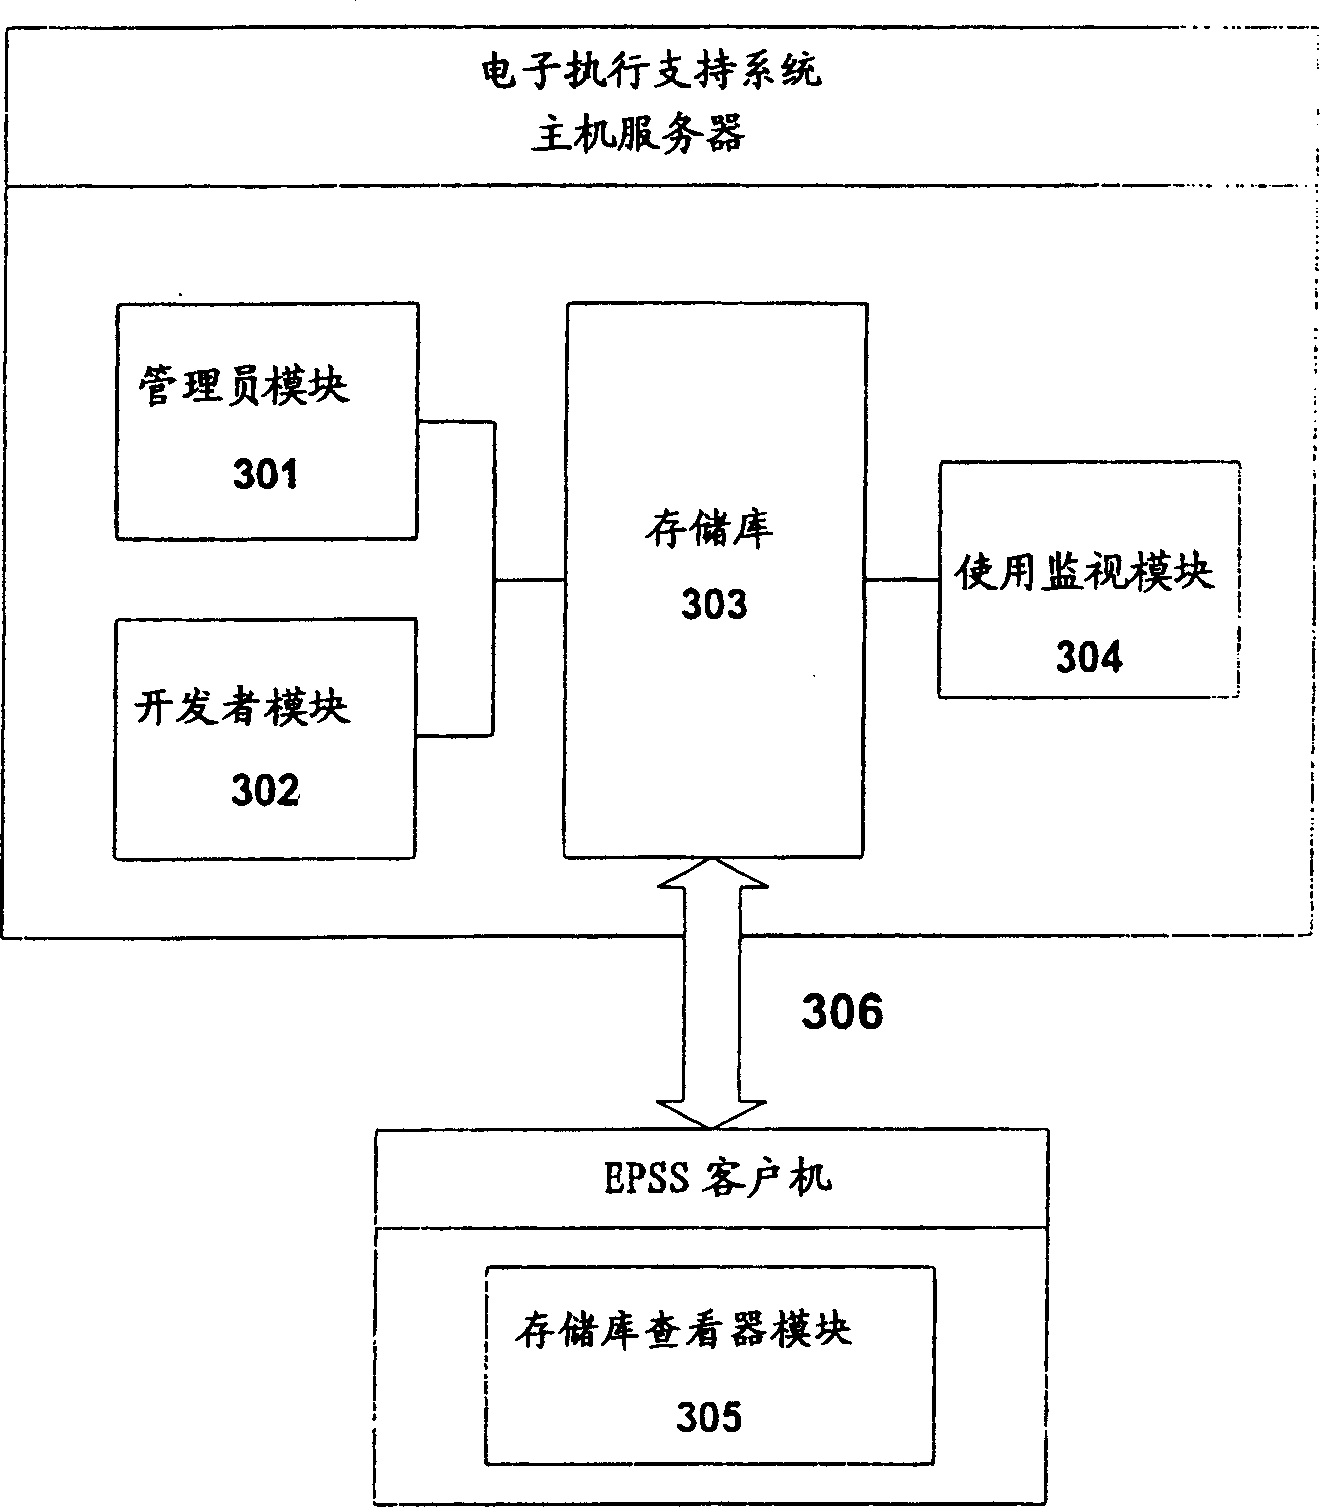 Maintenance and inspection system and method